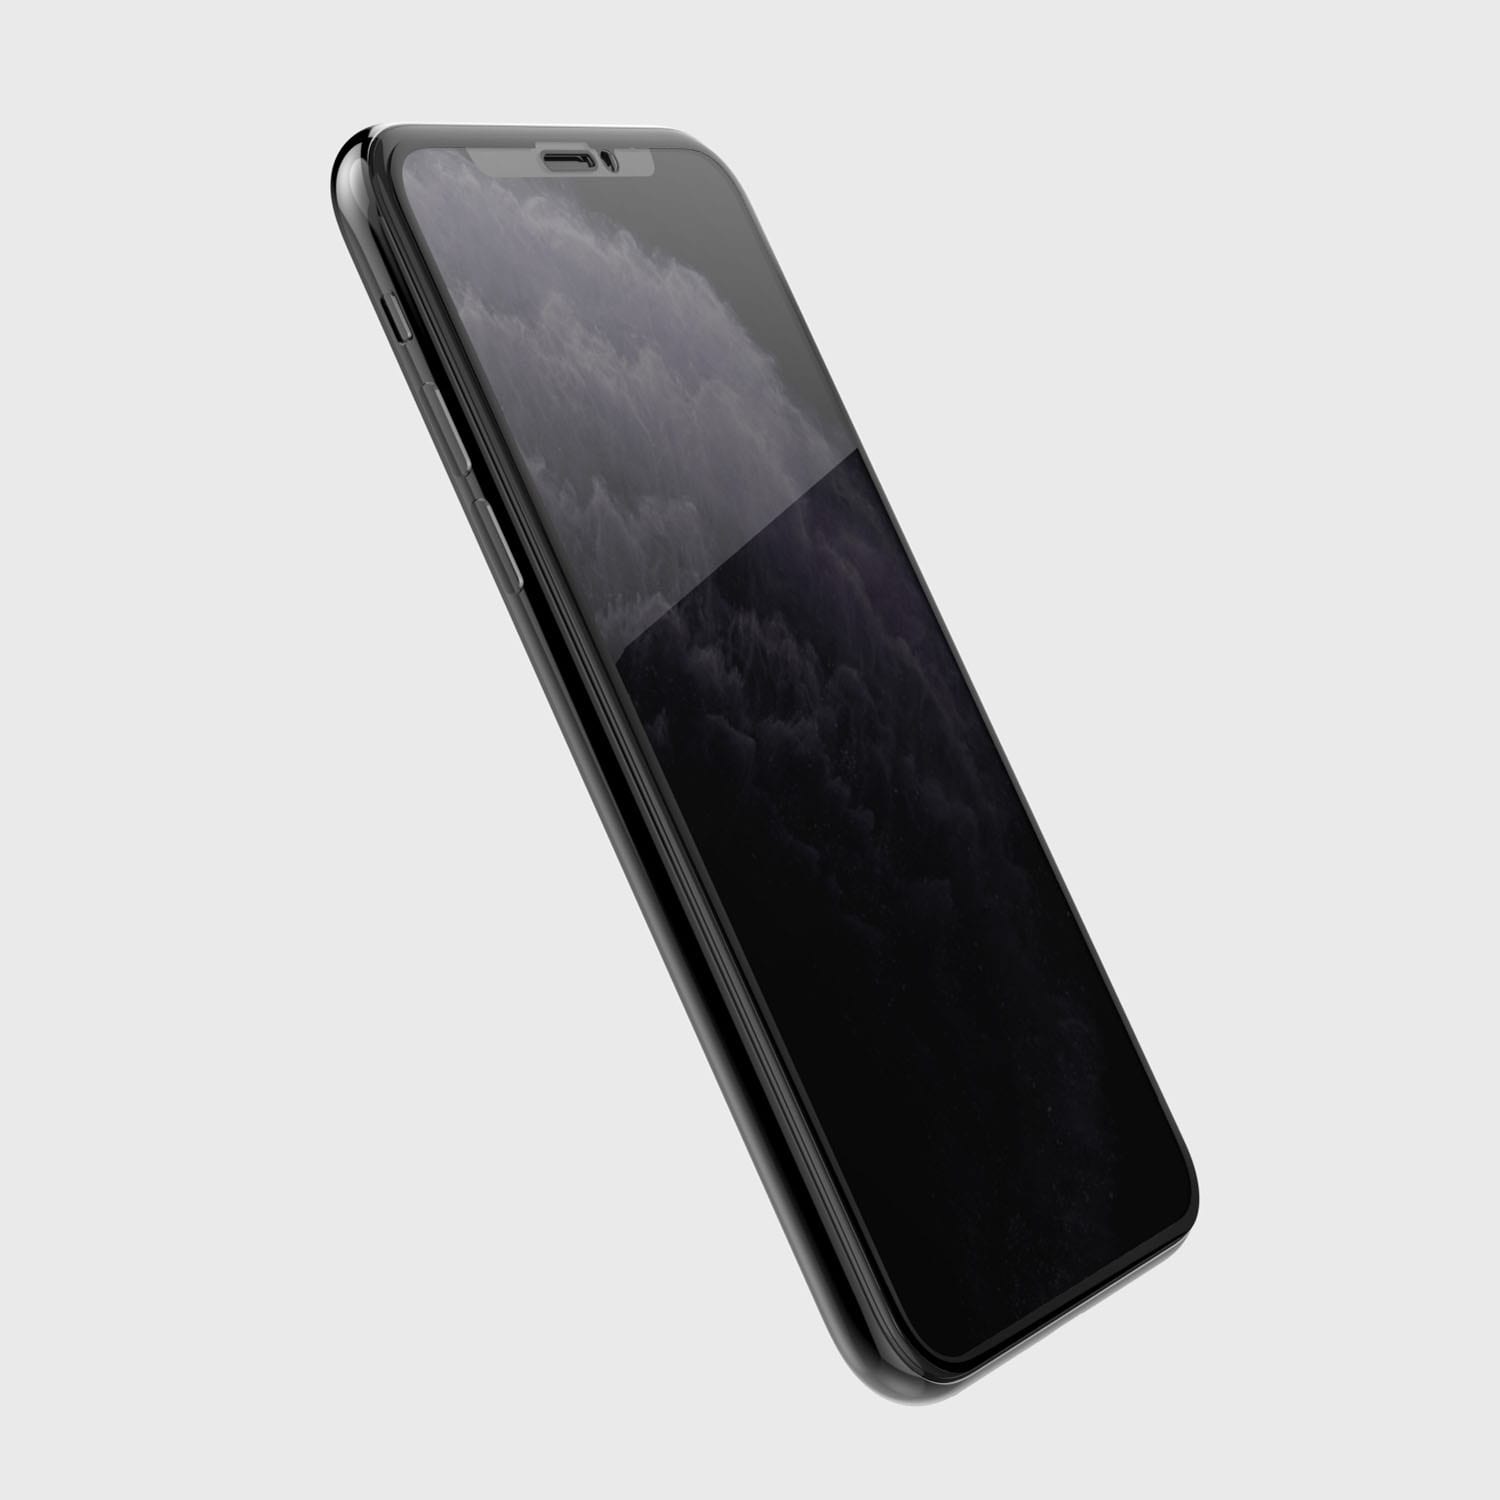 A black iPhone XR with Raptic 9H hardness tempered glass screen protection on a white background.